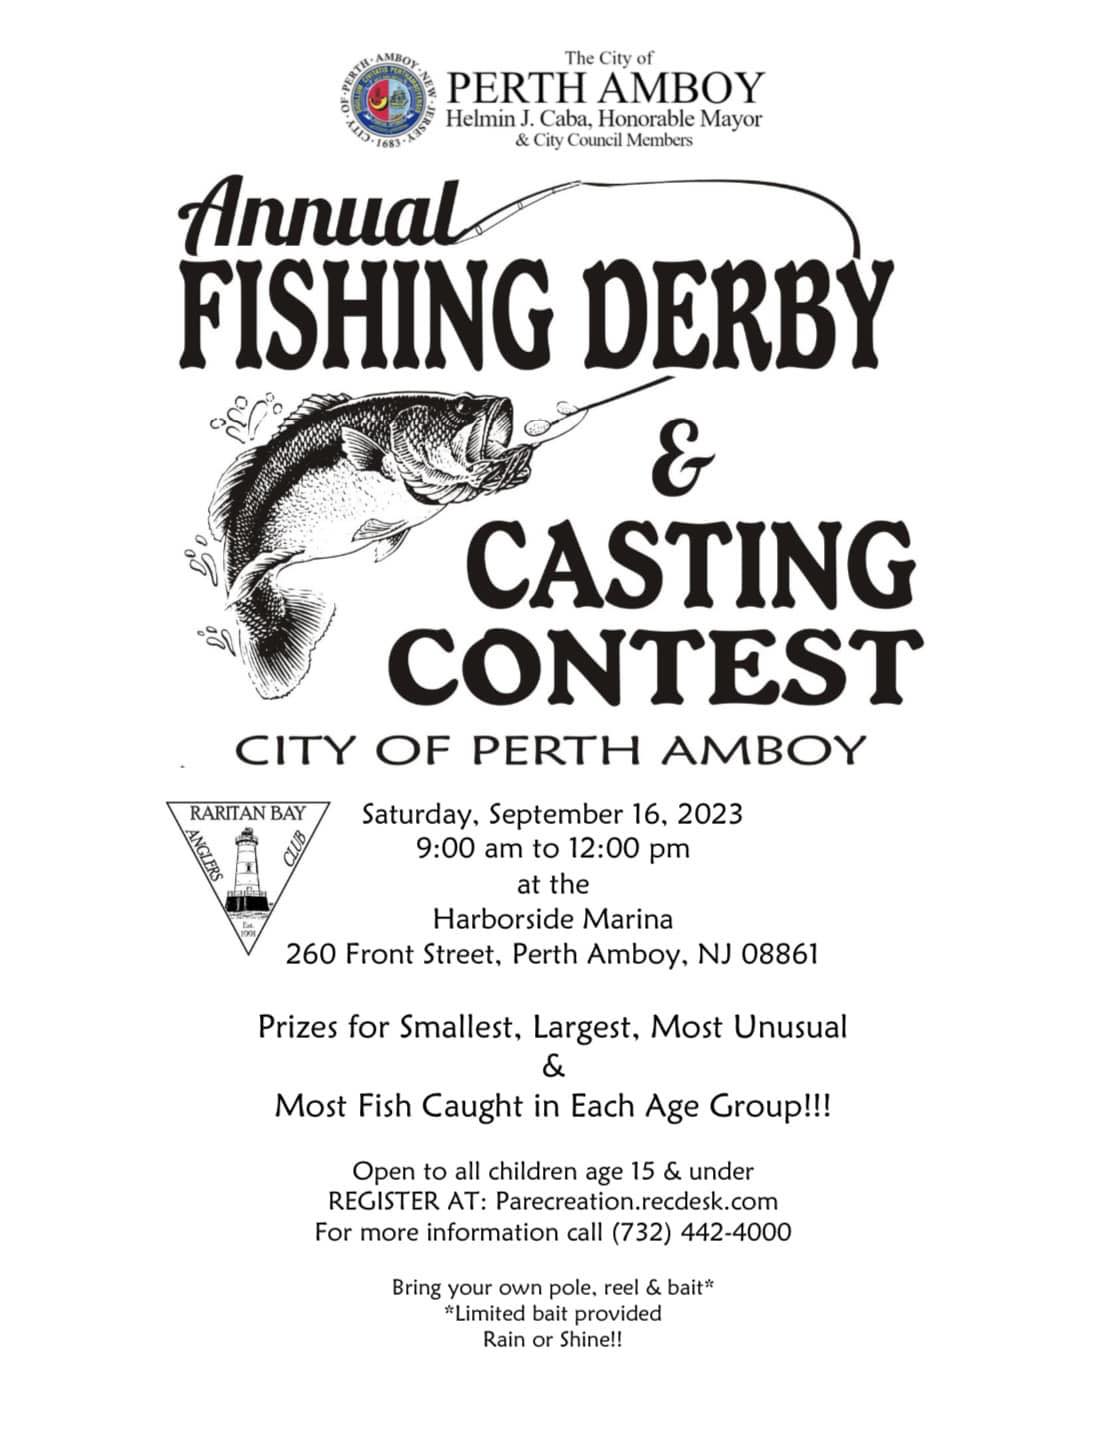 Casting Tournament and Fishing Derby Perth Amboy